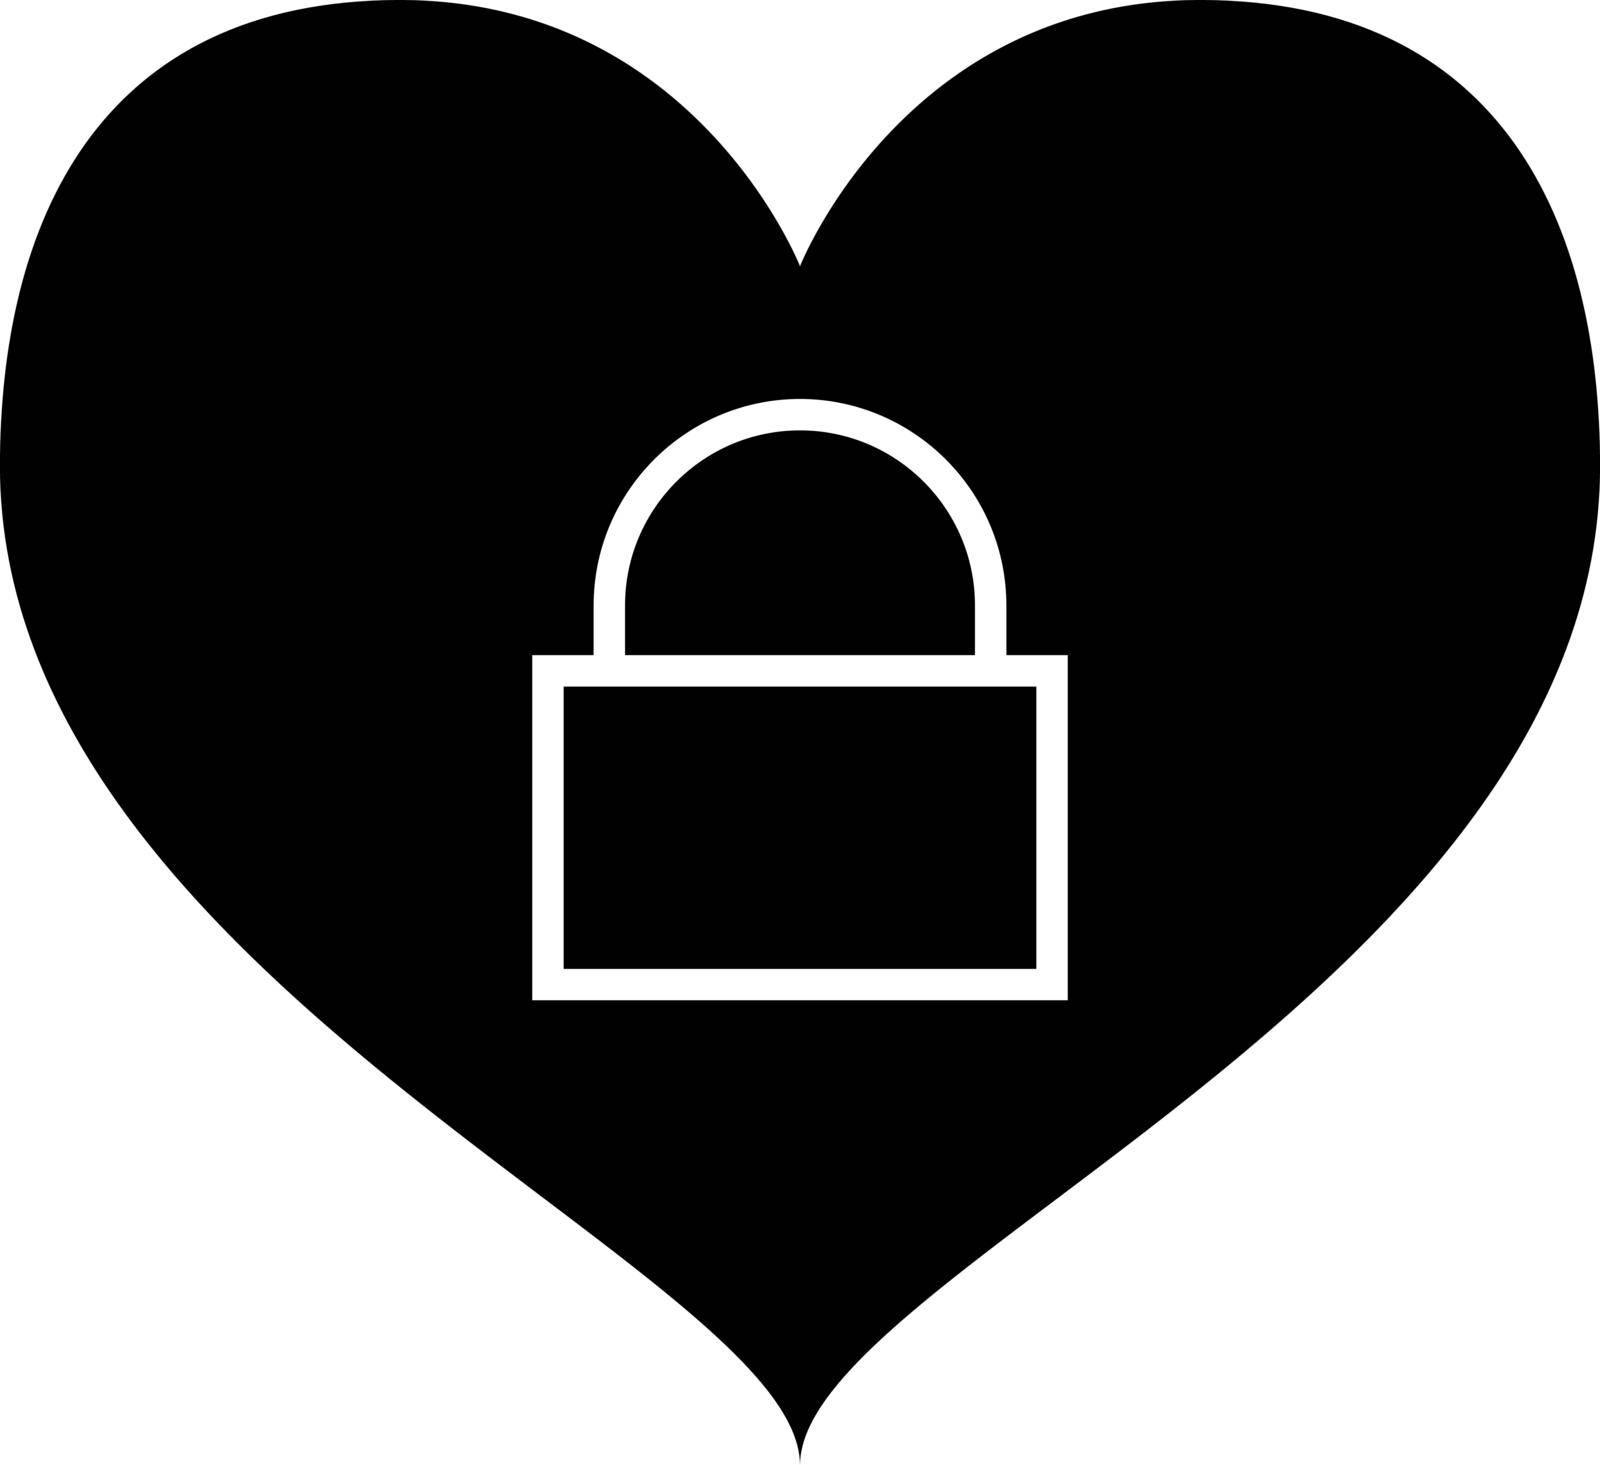 This vector image shows a locked heart in glyph icon design. It is isolated on a white background.